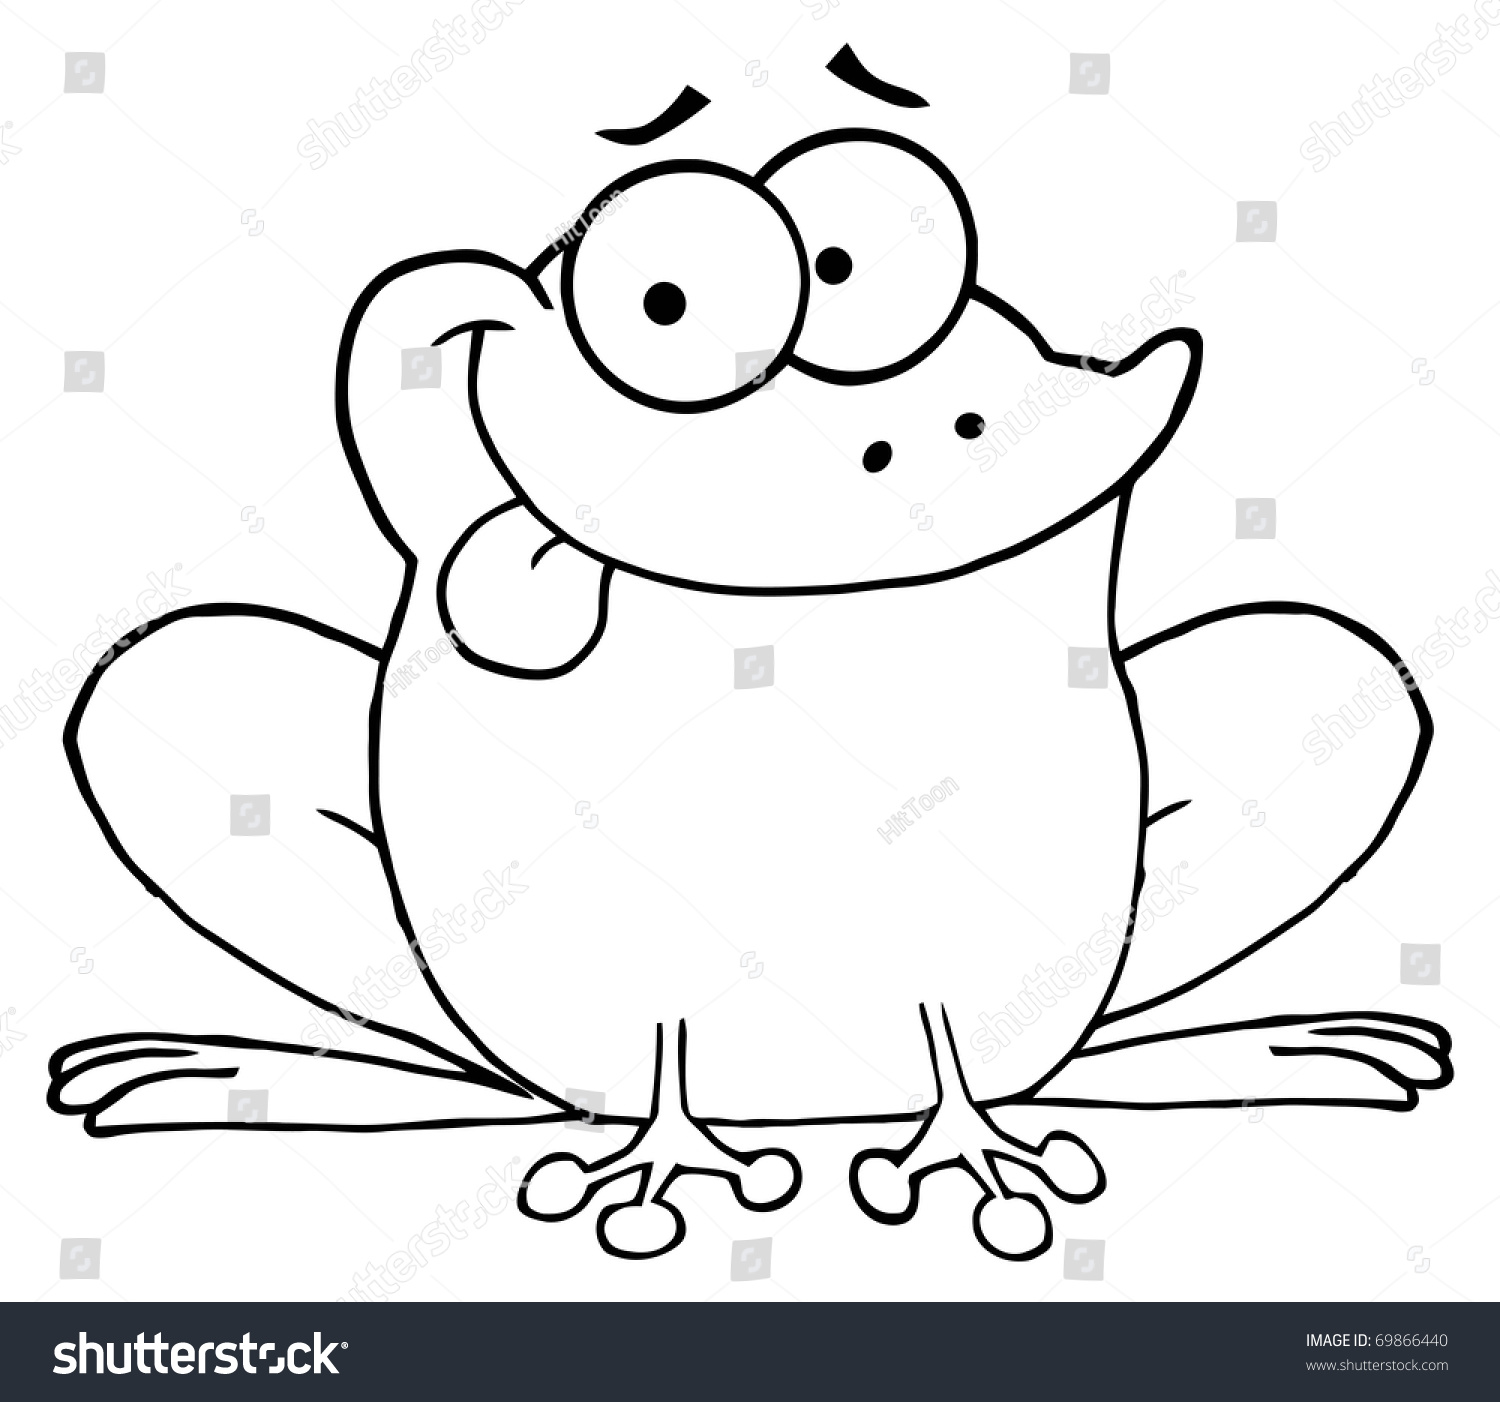 Outlined Happy Frog Cartoon Character Stock Photo 69866440 : Shutterstock